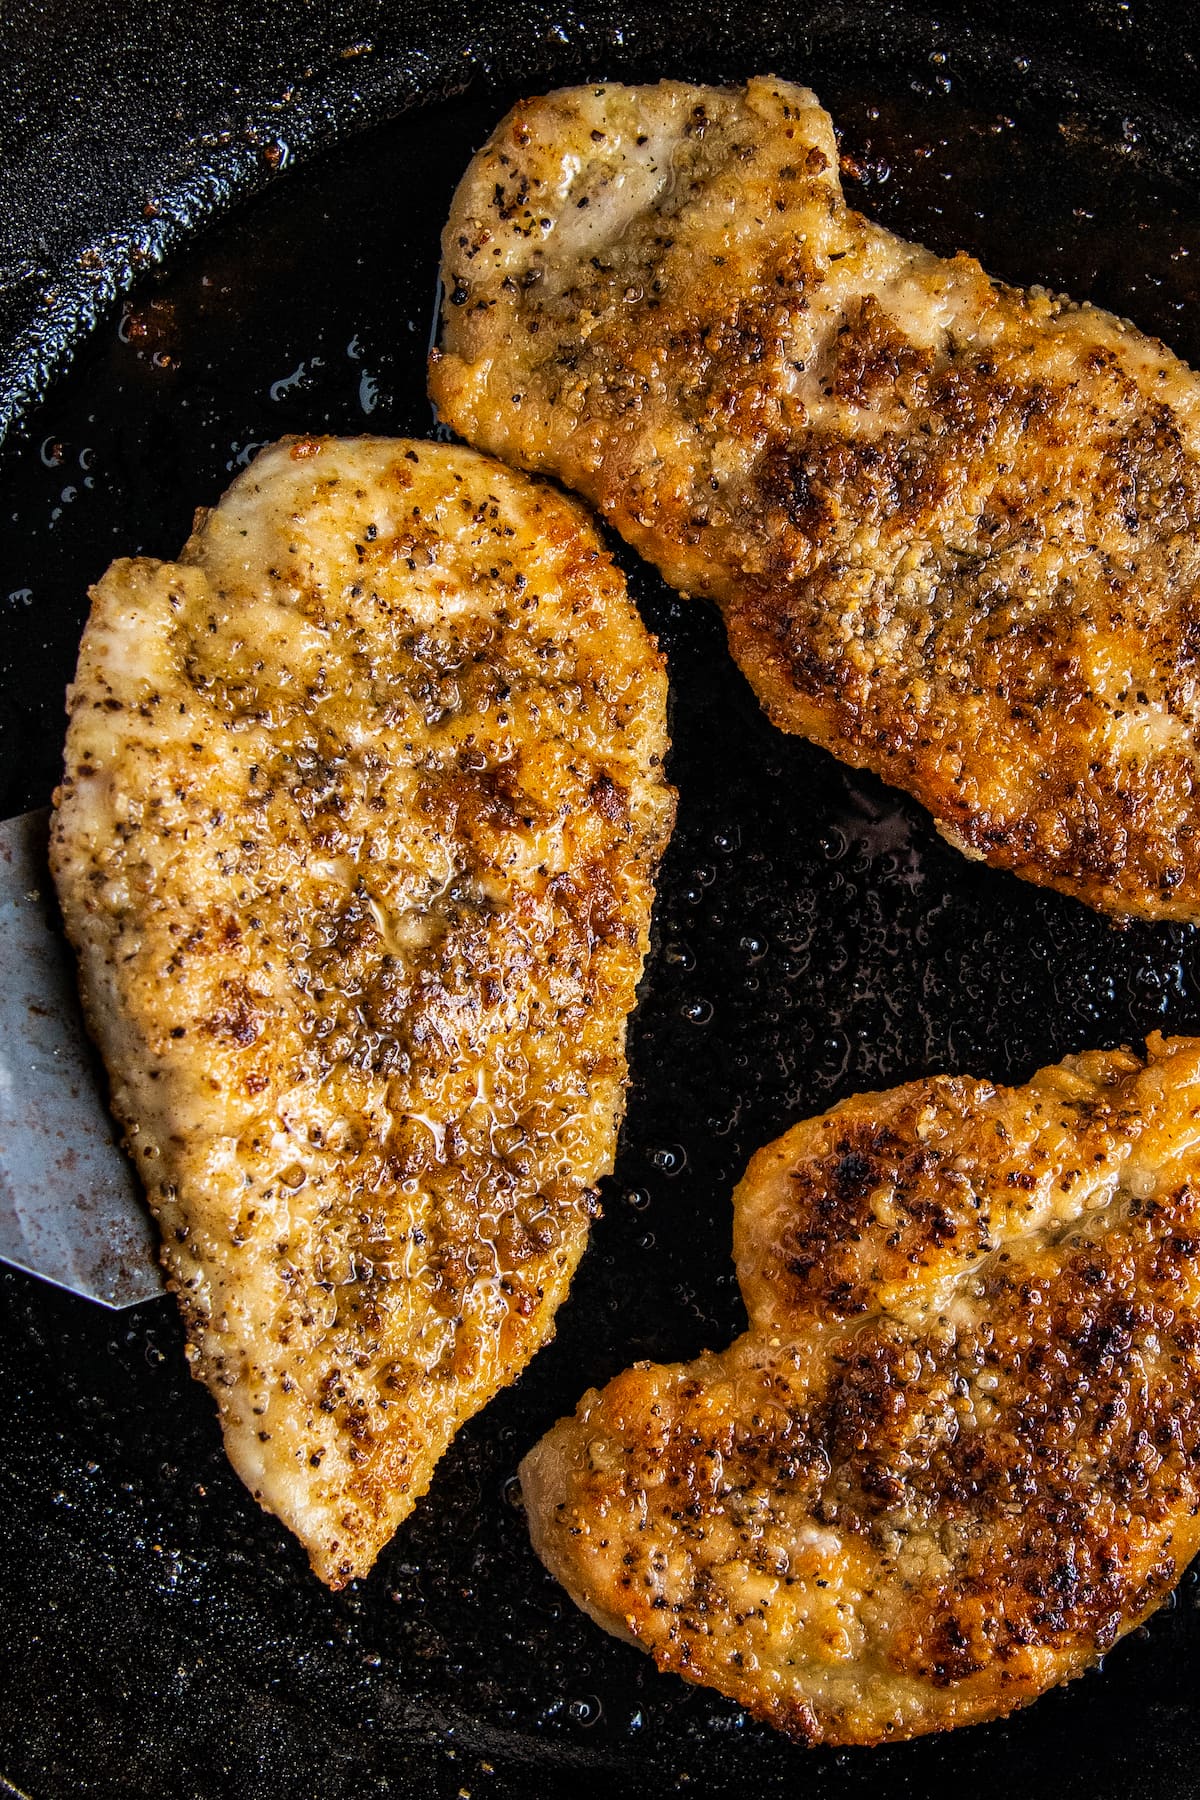 three pan fried chicken breasts